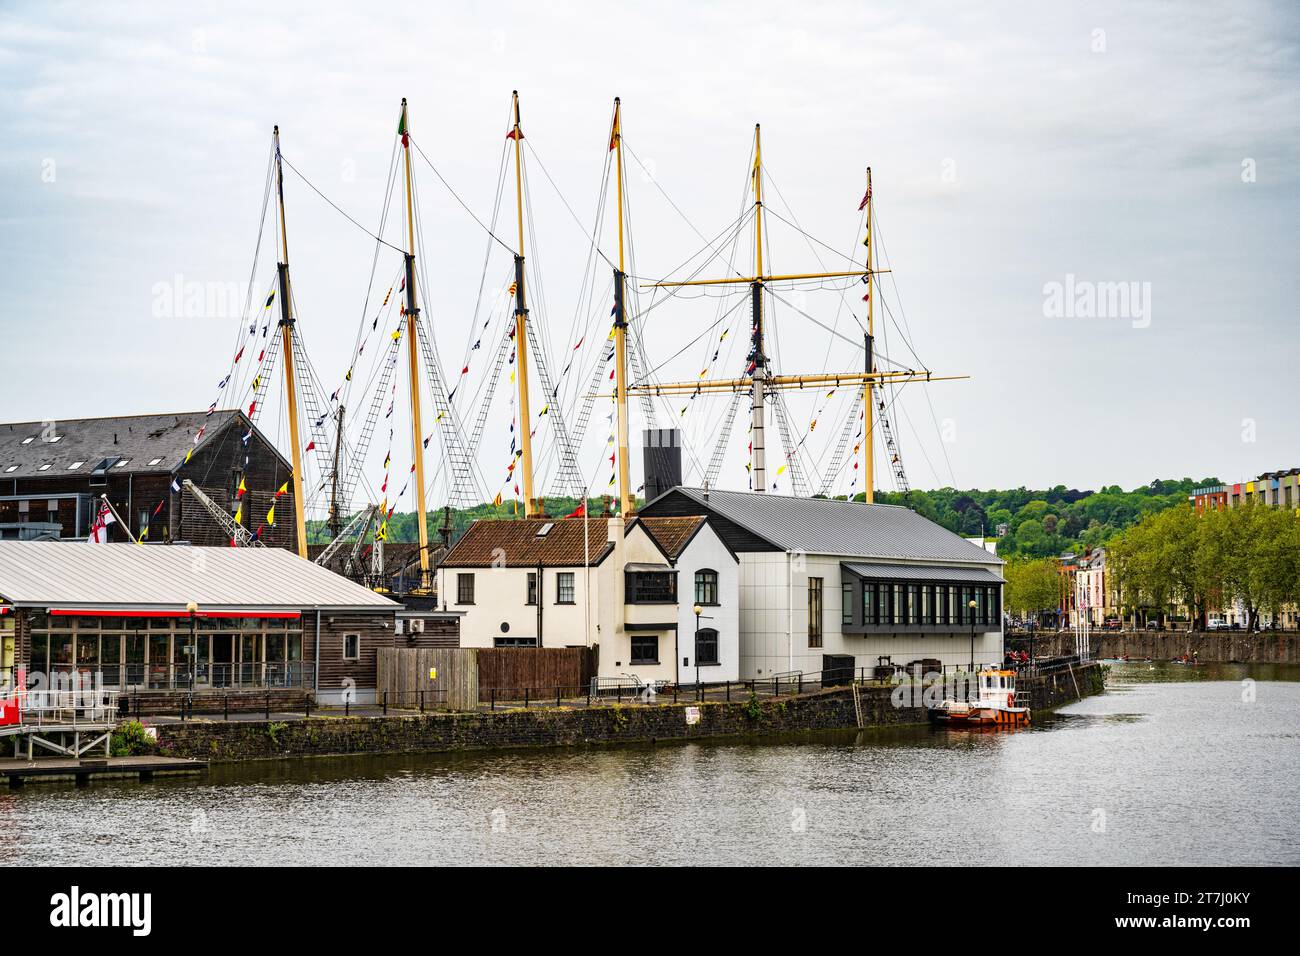 Six masts of Brunel's iron ship, SS Great Britain, a museum ship and former passenger steamship, at the Great Western Dockyard, Bristol, England, UK Stock Photo